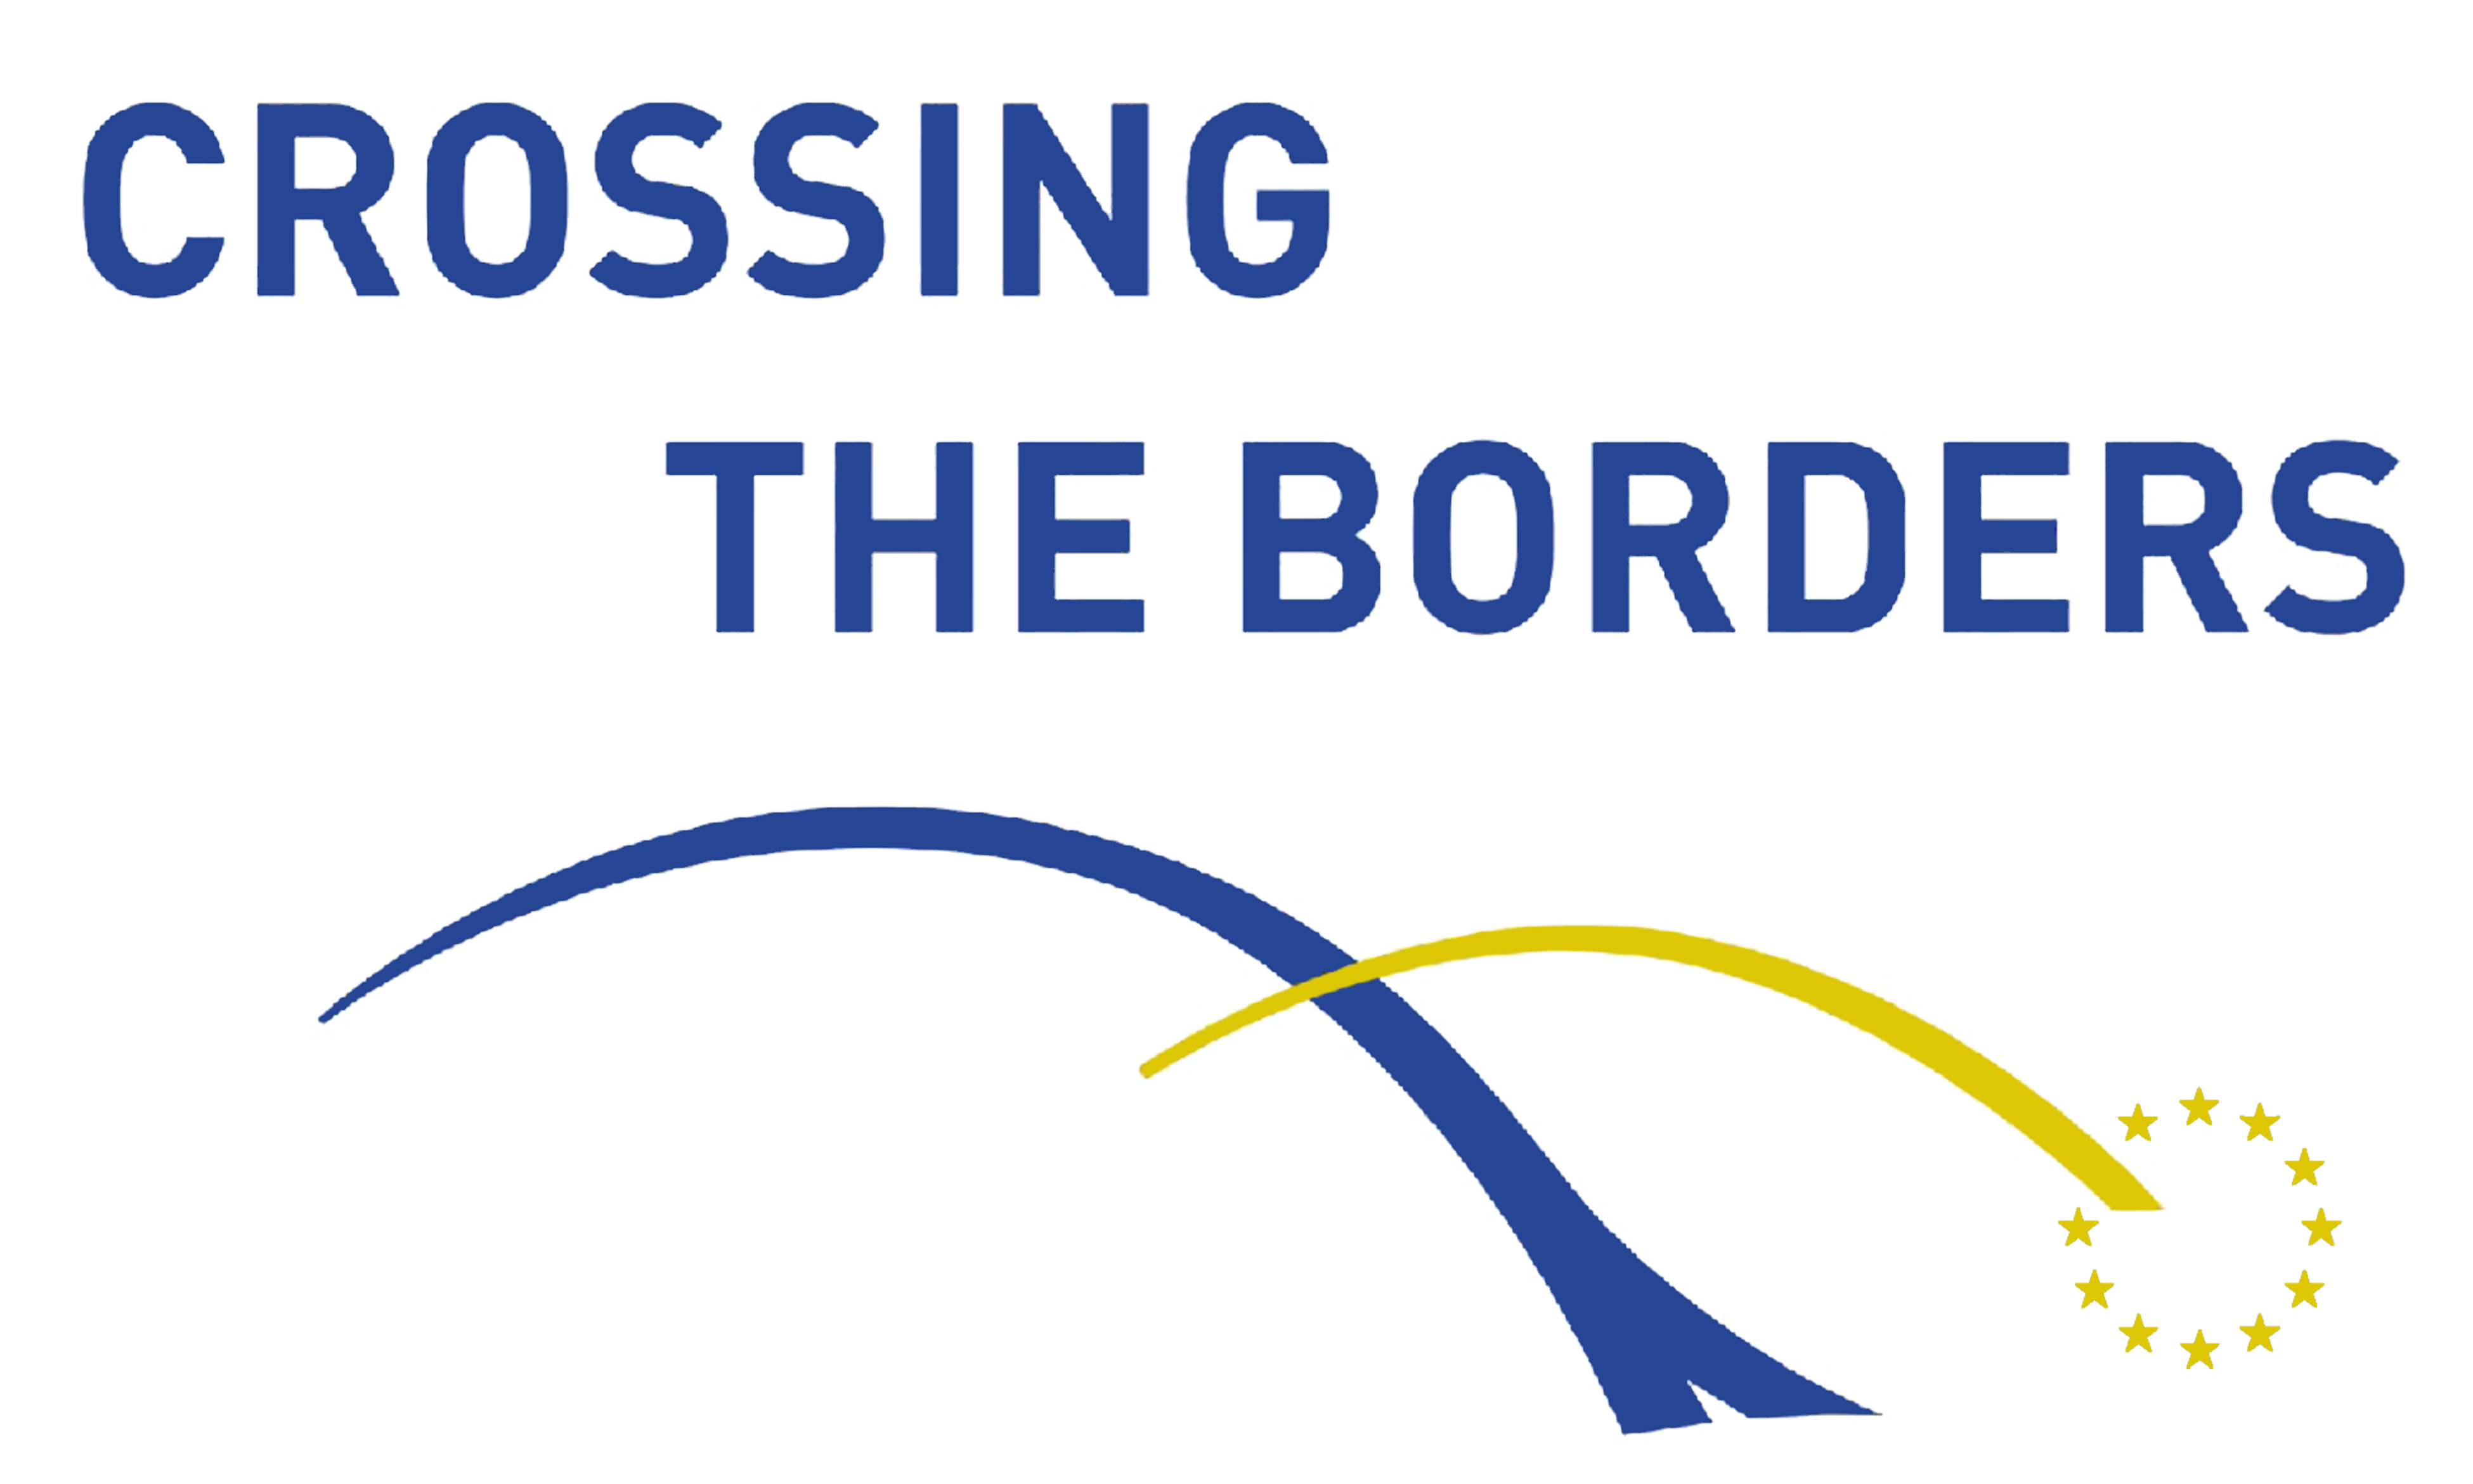 CESCI - Crossing the borders conference